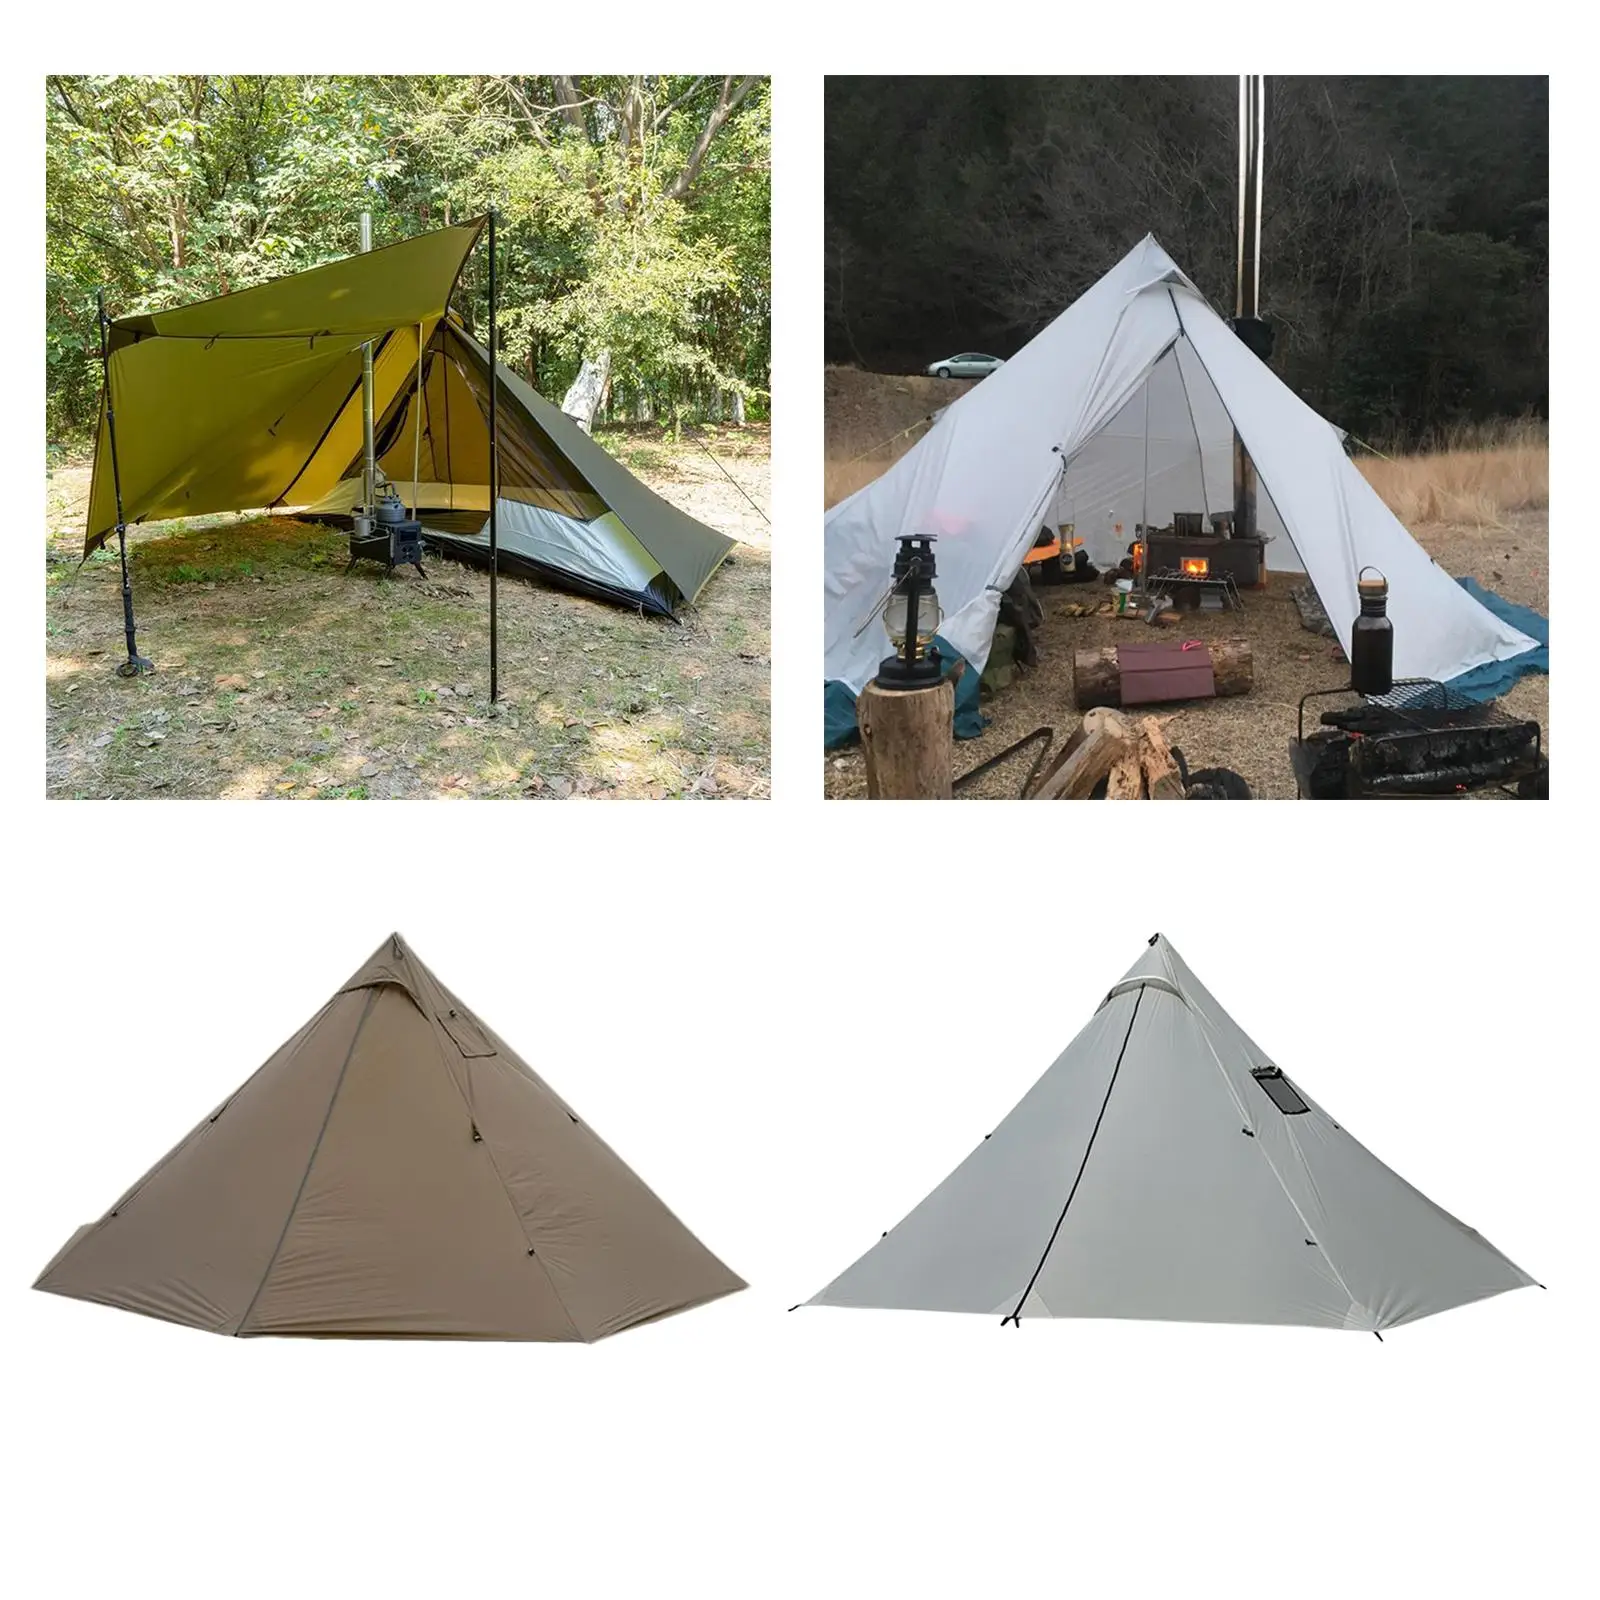 

Camping Teepee Tent Stove Tent Ultralight 4 Person lightweight Tipi Hot Tent for Fishing Hunting Family Team Backpacking Hiking